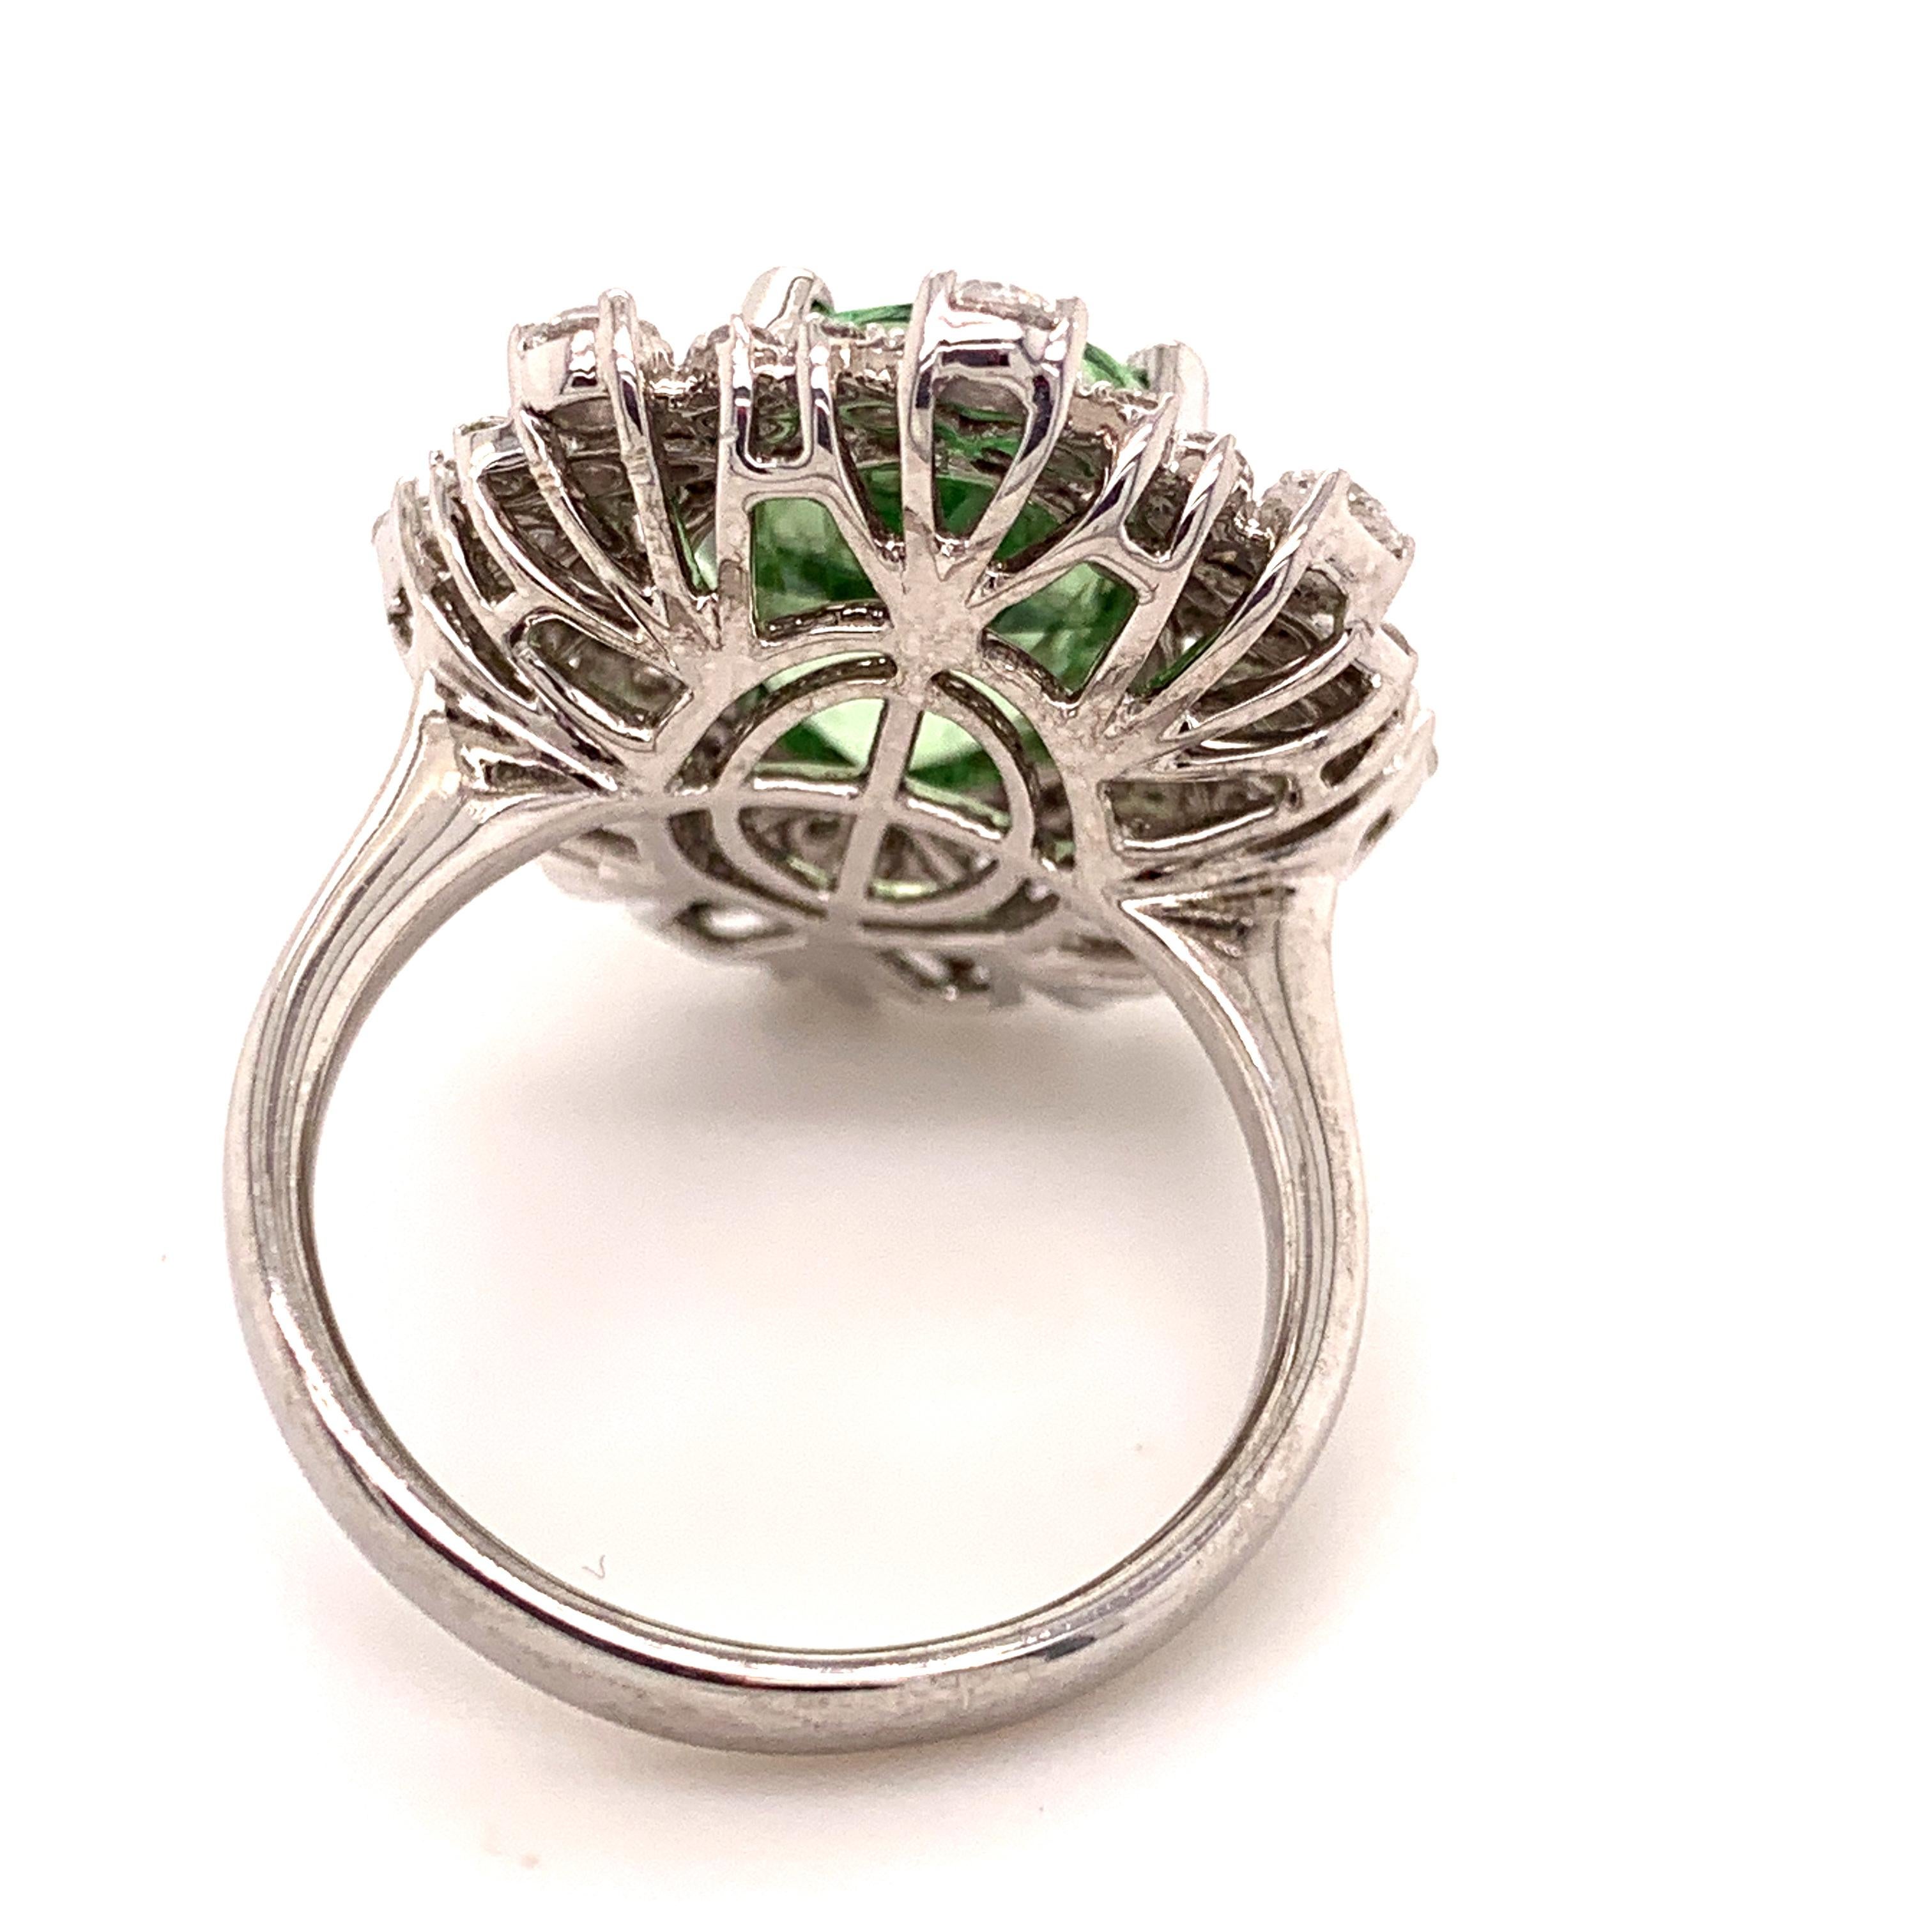 This 18-karat white gold ring size 6 1/2 has a cluster of 64 Diamonds in various sizes and shapes with G color and VS Grade weighing a total of 1.64 carats. The mint green center stone is a Merelani Mint Garnet (verity Grossular Garnet)  and as the